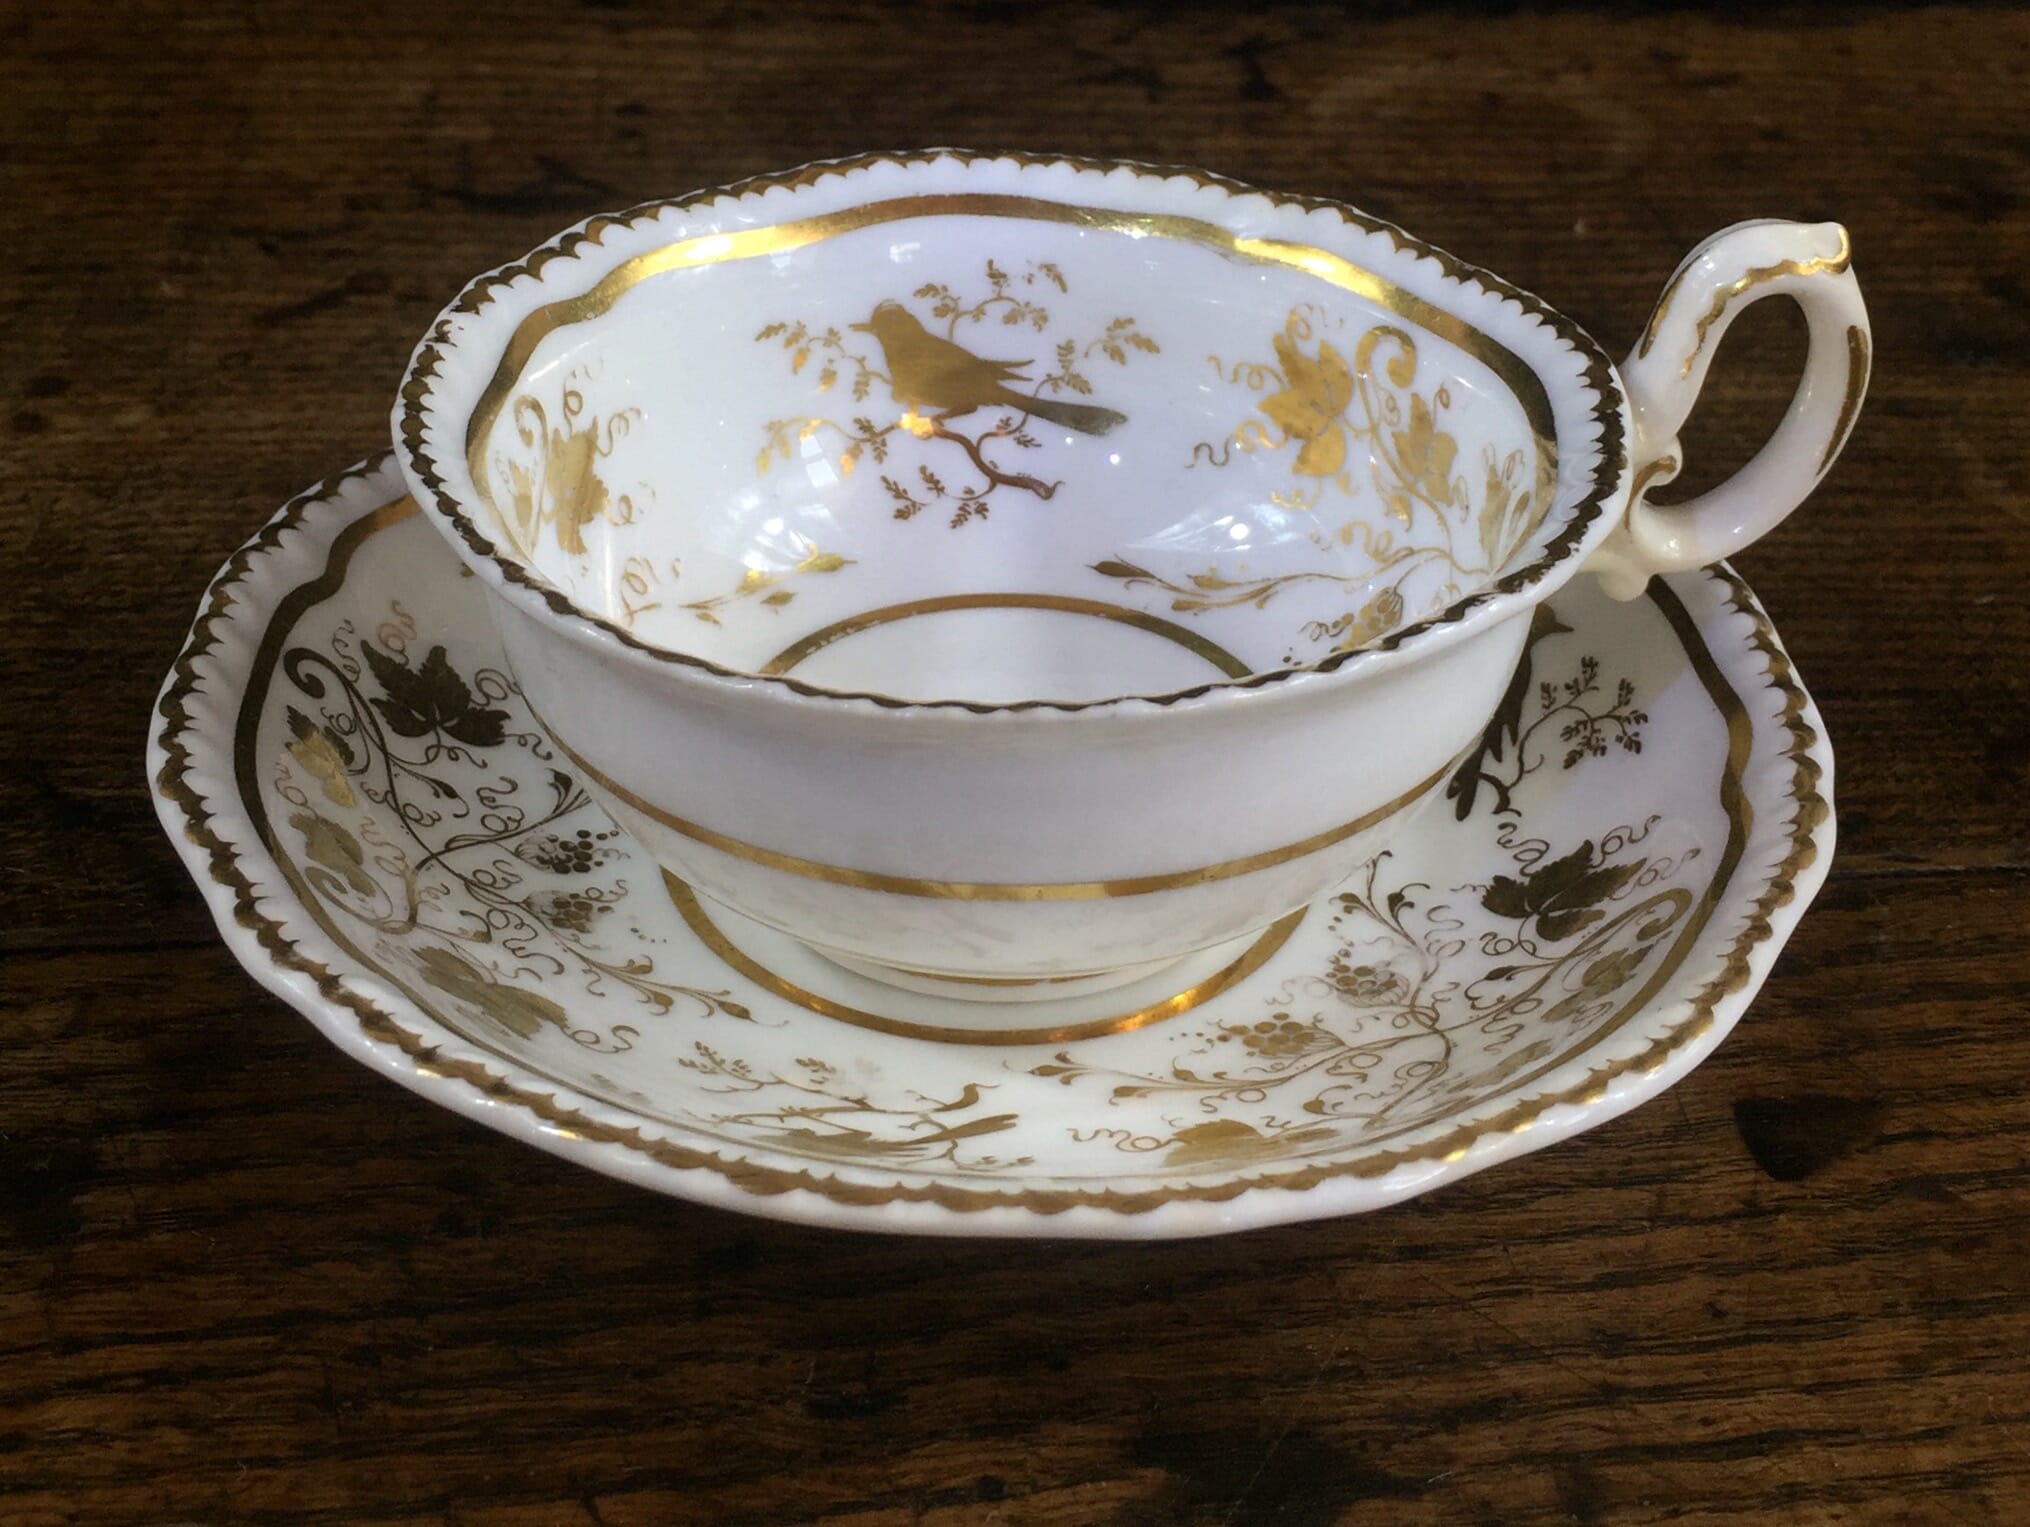 Granger Worcester cup and saucer with gilt bird and grape decoration c. 1830-0